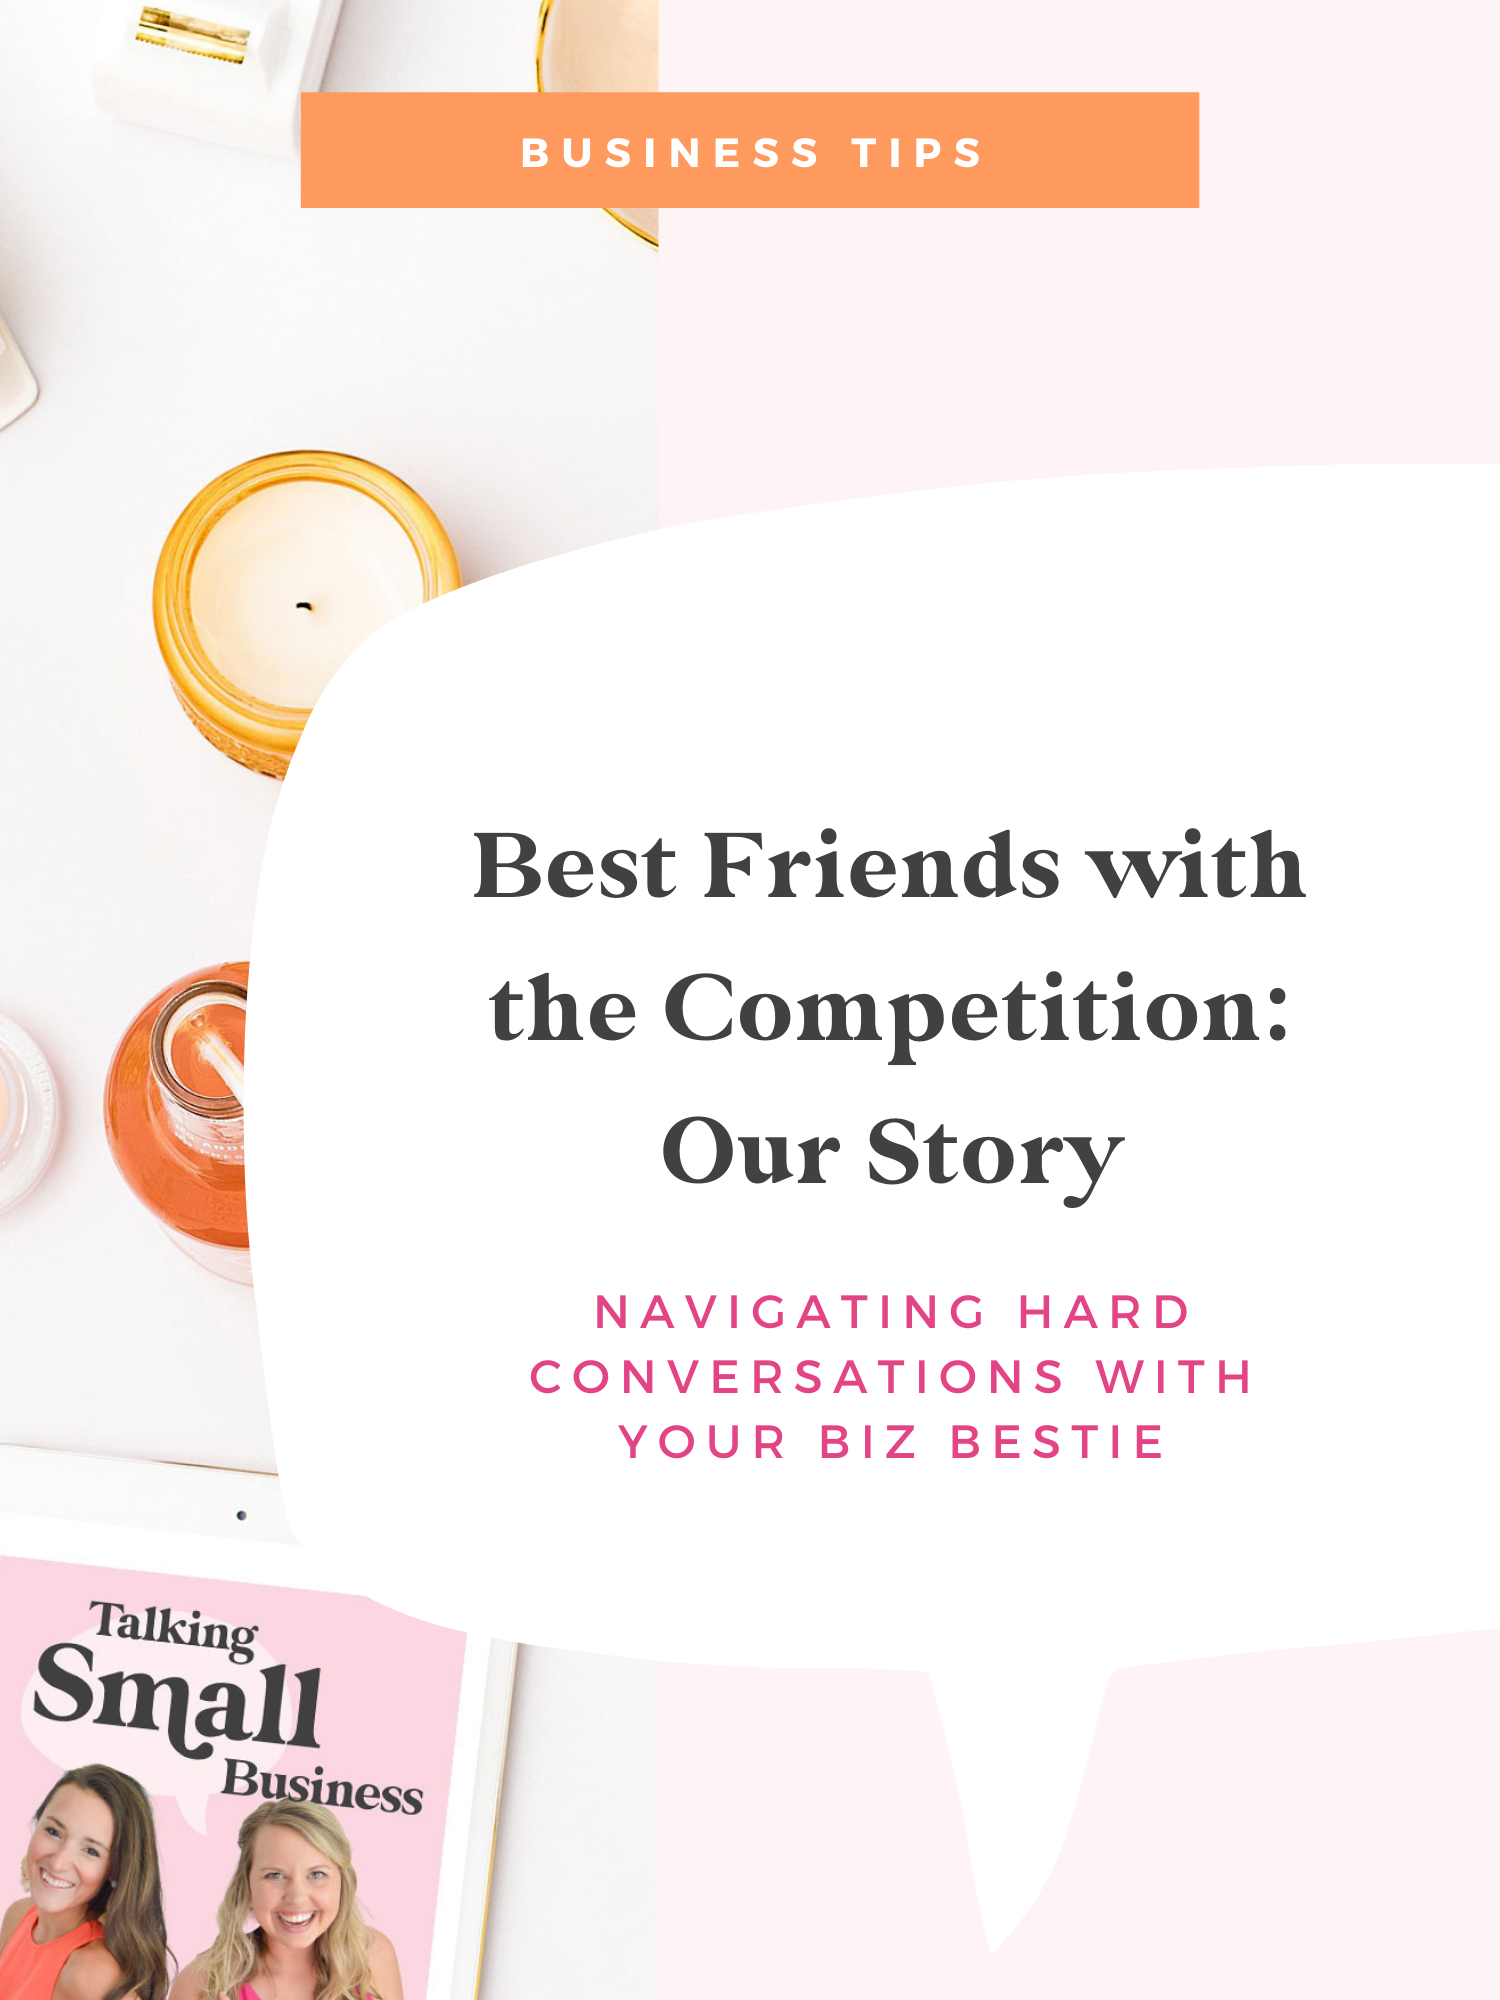 Can you be best friends with your competition in small business?